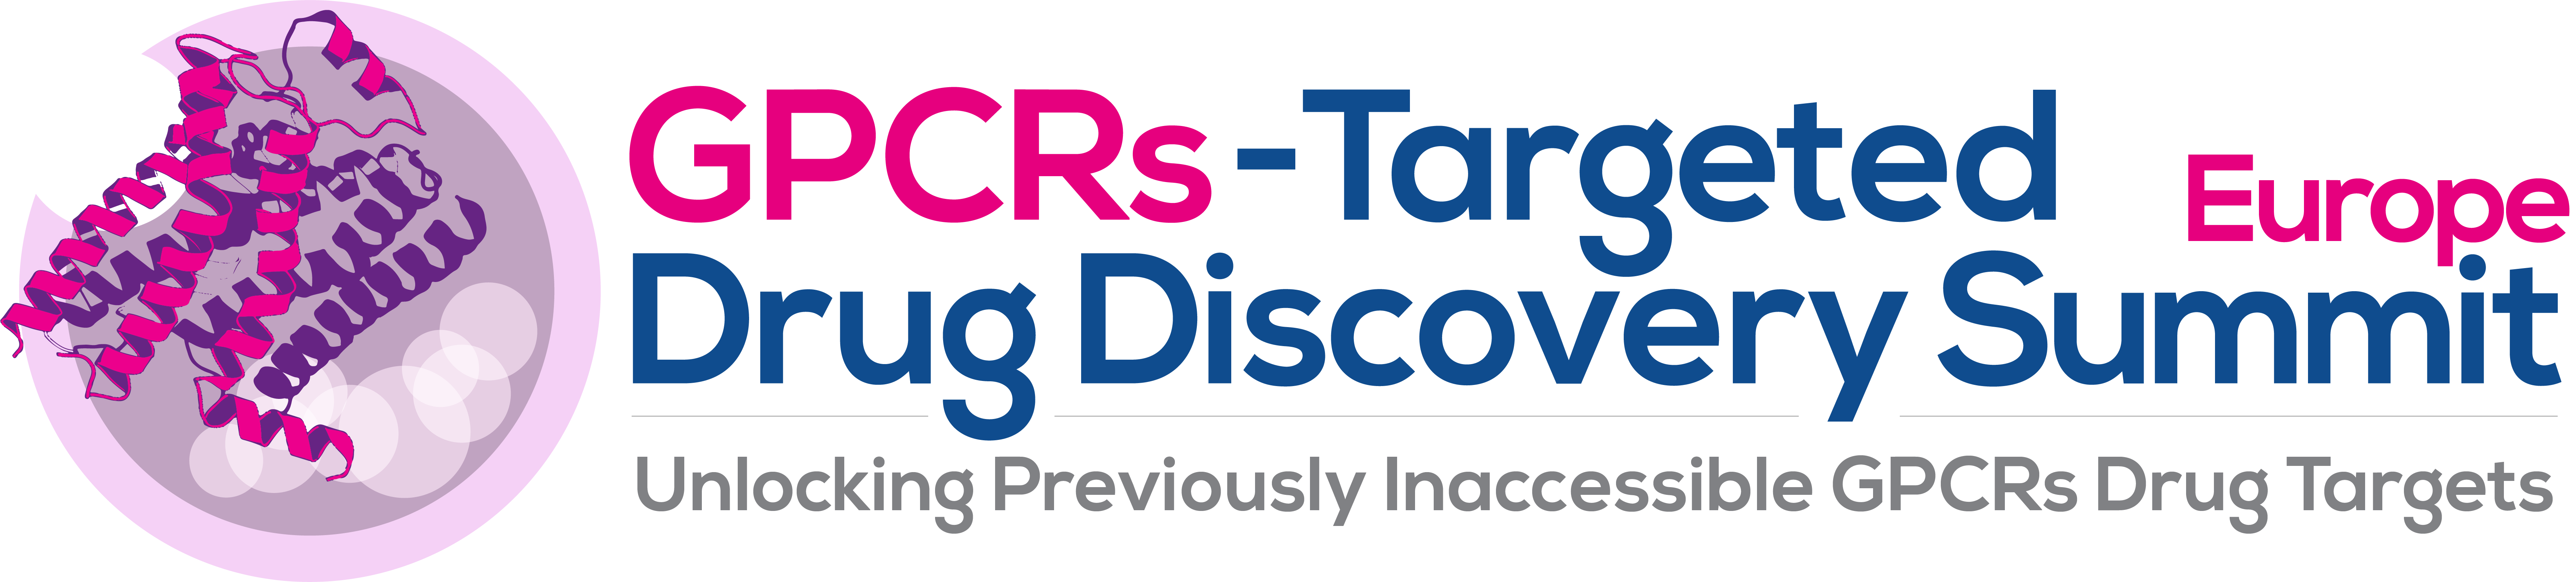 HW240707 49702 GPCRs-Targeted Drug Discovery Summit Europe logo FINAL TAG (1)